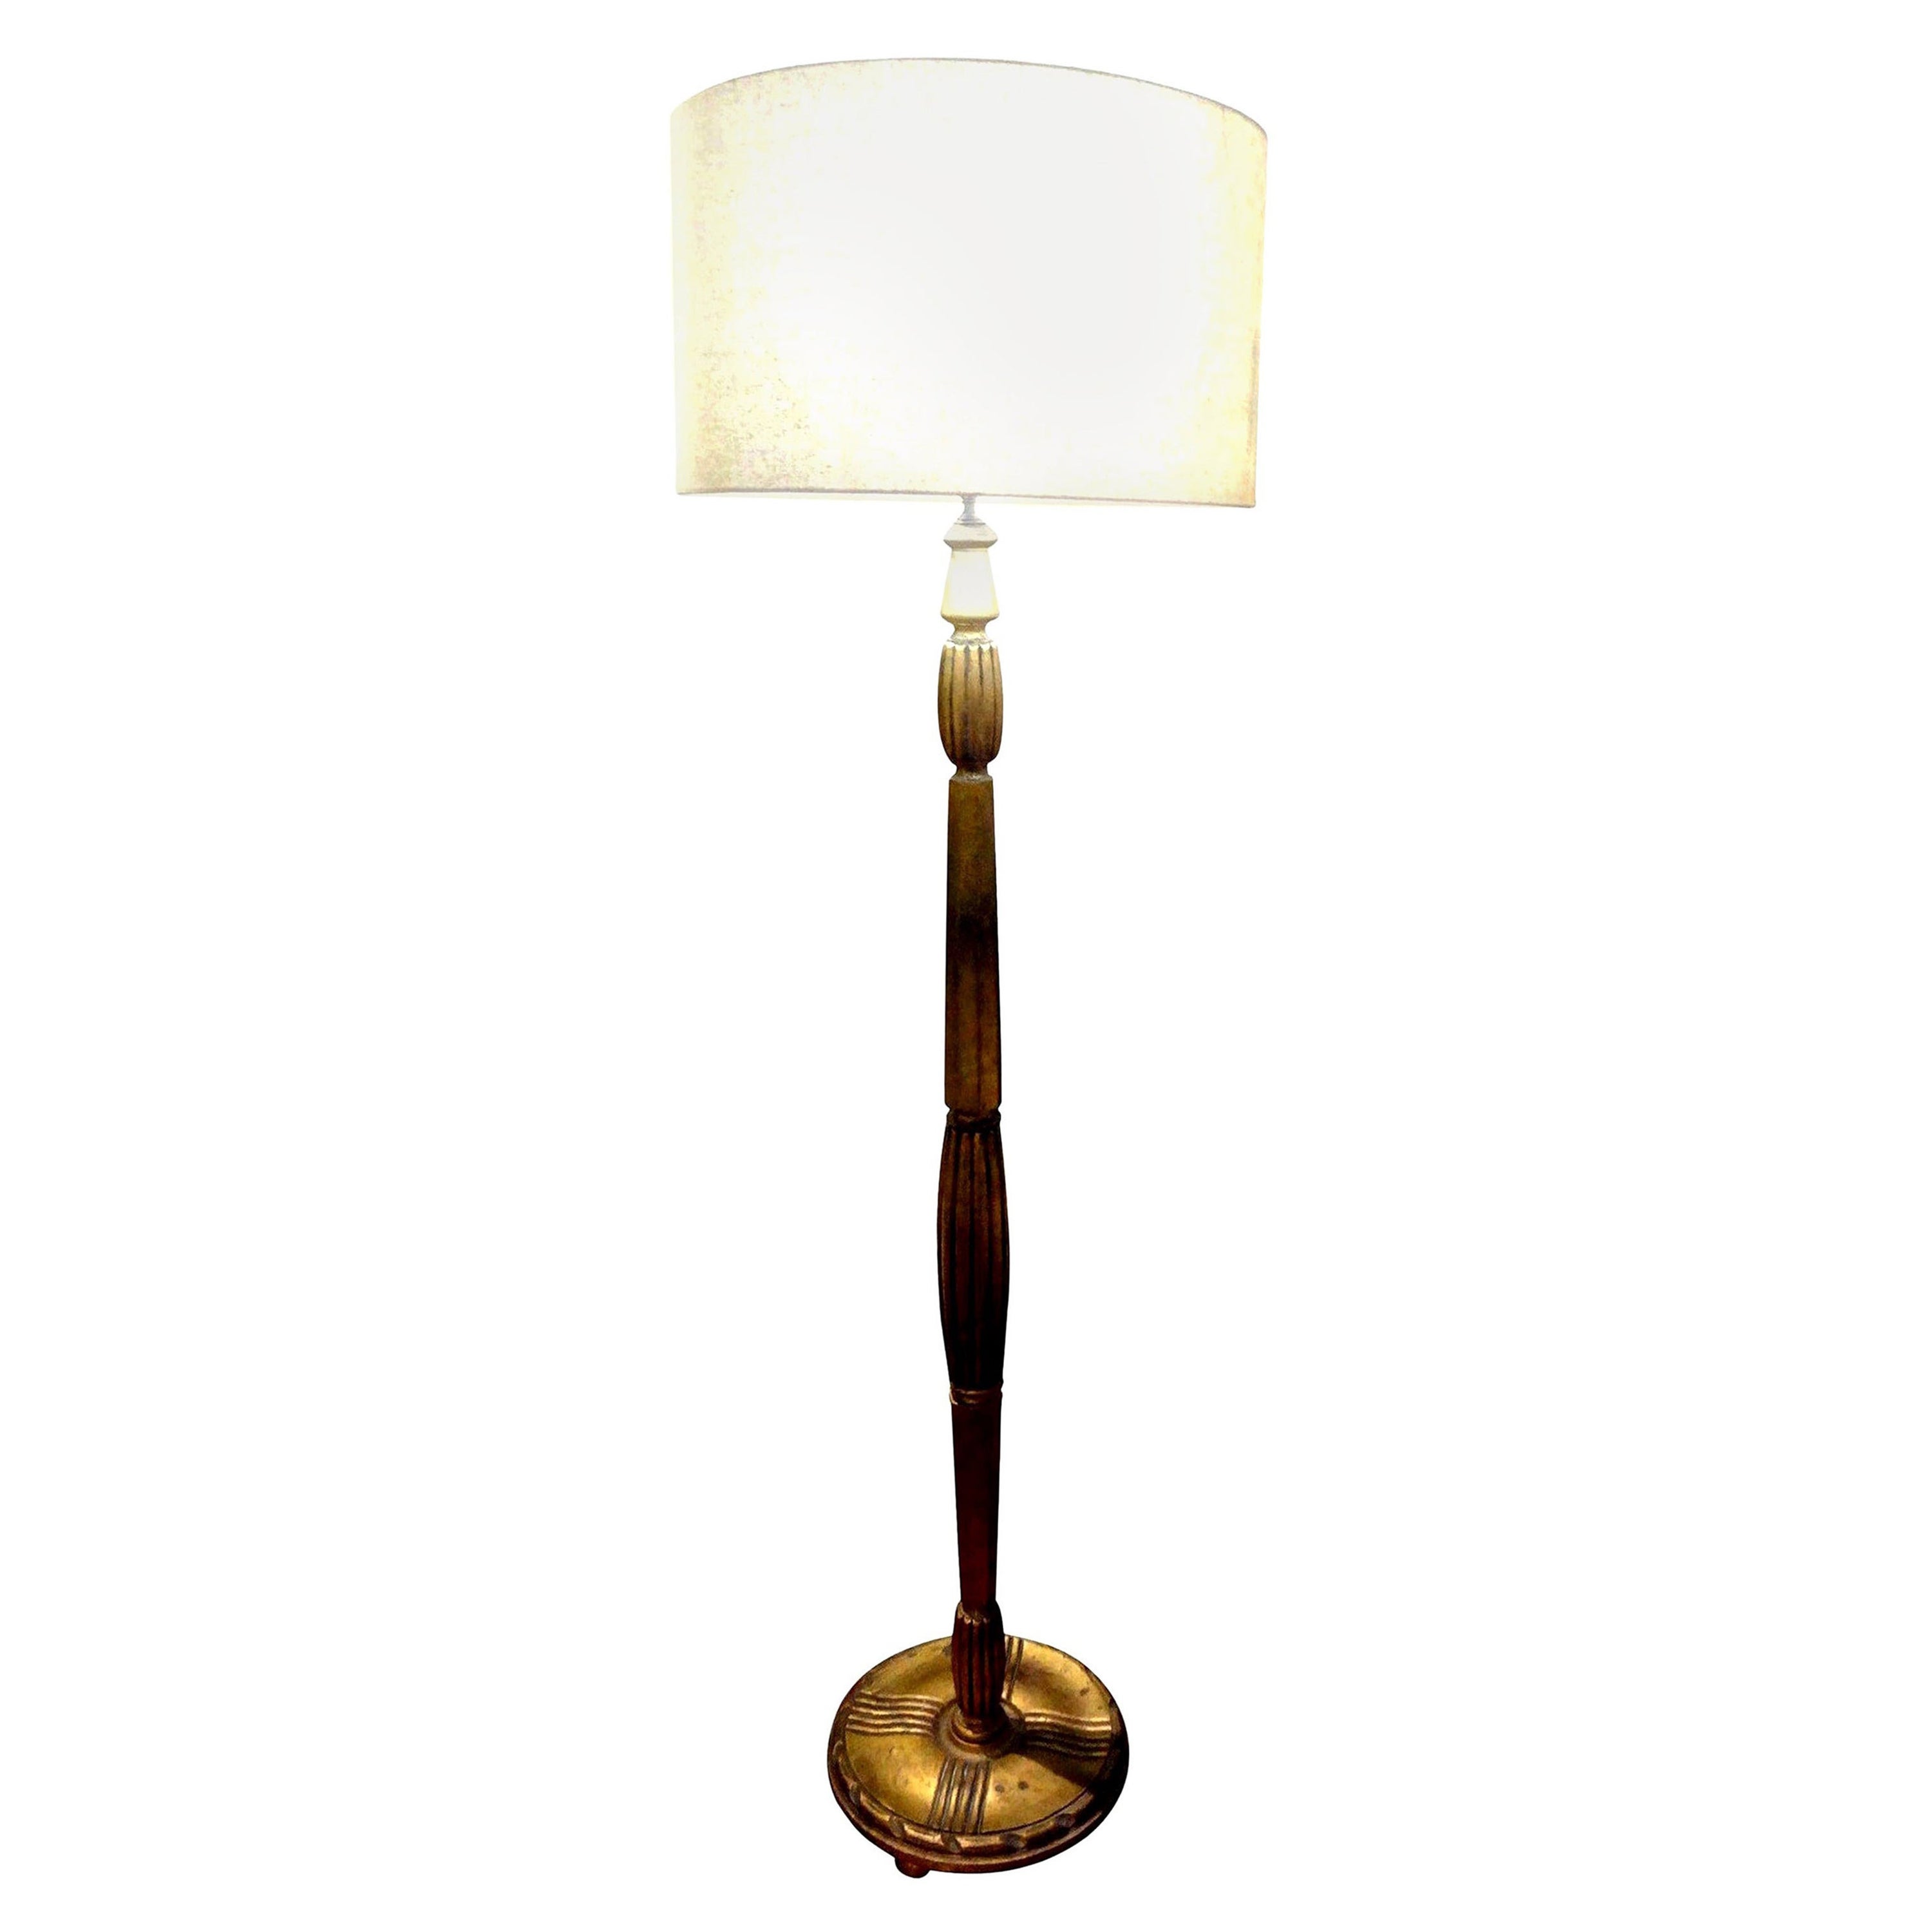 French Art Deco Jules Leleu Style Giltwood Floor Lamp For Sale